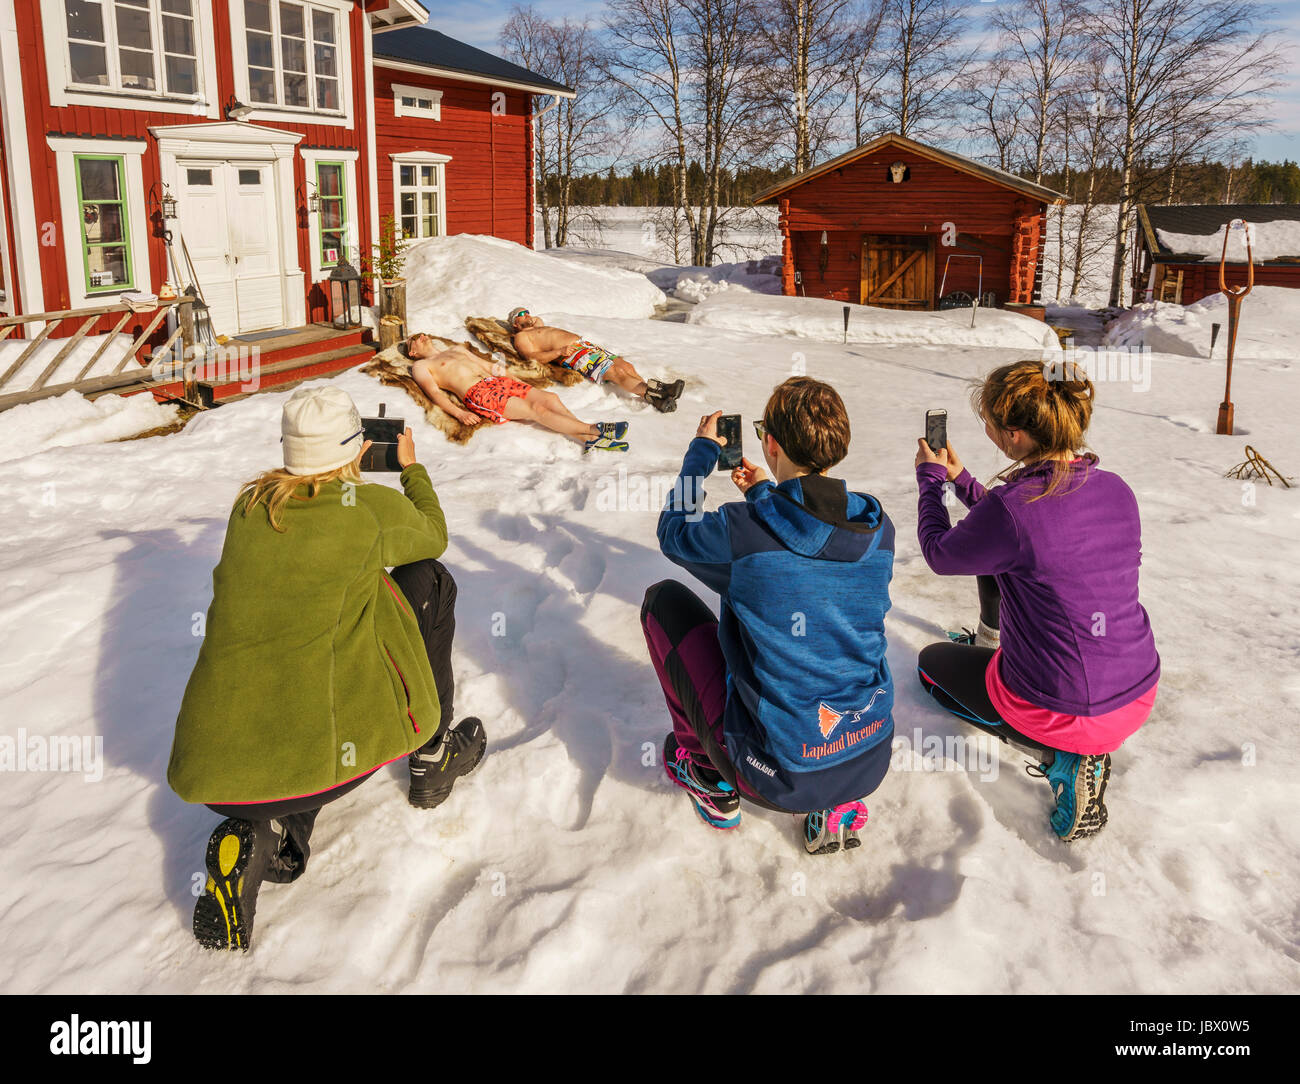 Tourists having fun taking pictures of locals sunbathing. Kangos is a locality situated in Pajala Municipality, Norrbotten County, Swedish Lapland. Stock Photo